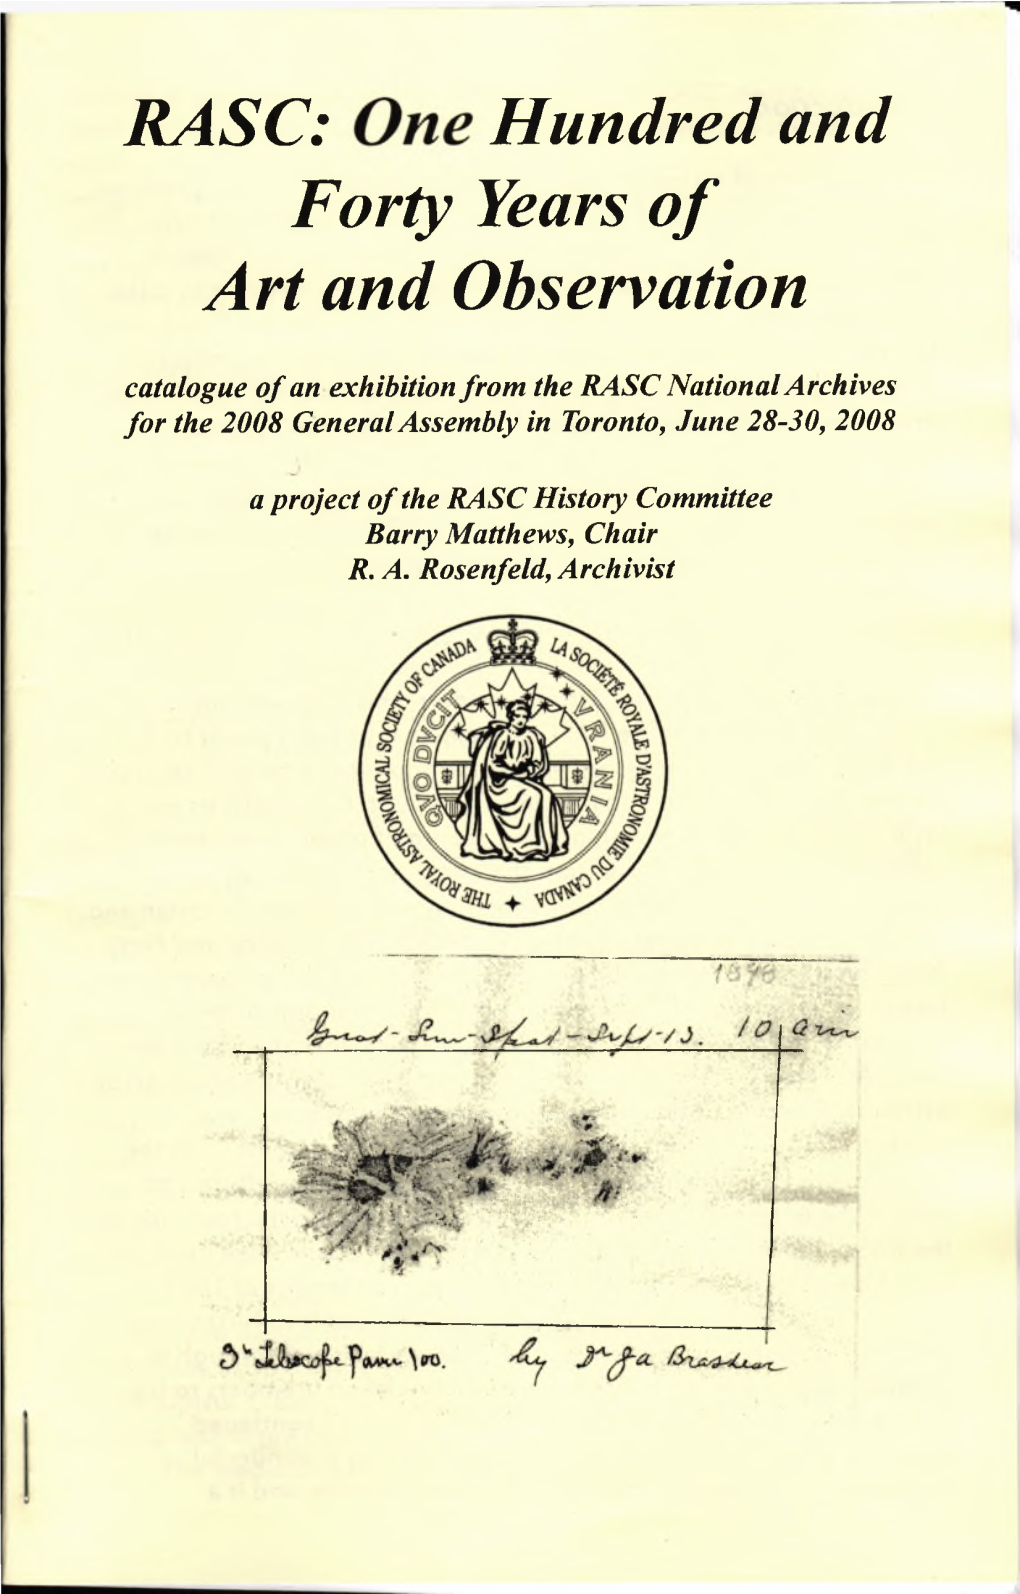 RASC: One Hundred and Forty Years of Art and Observation